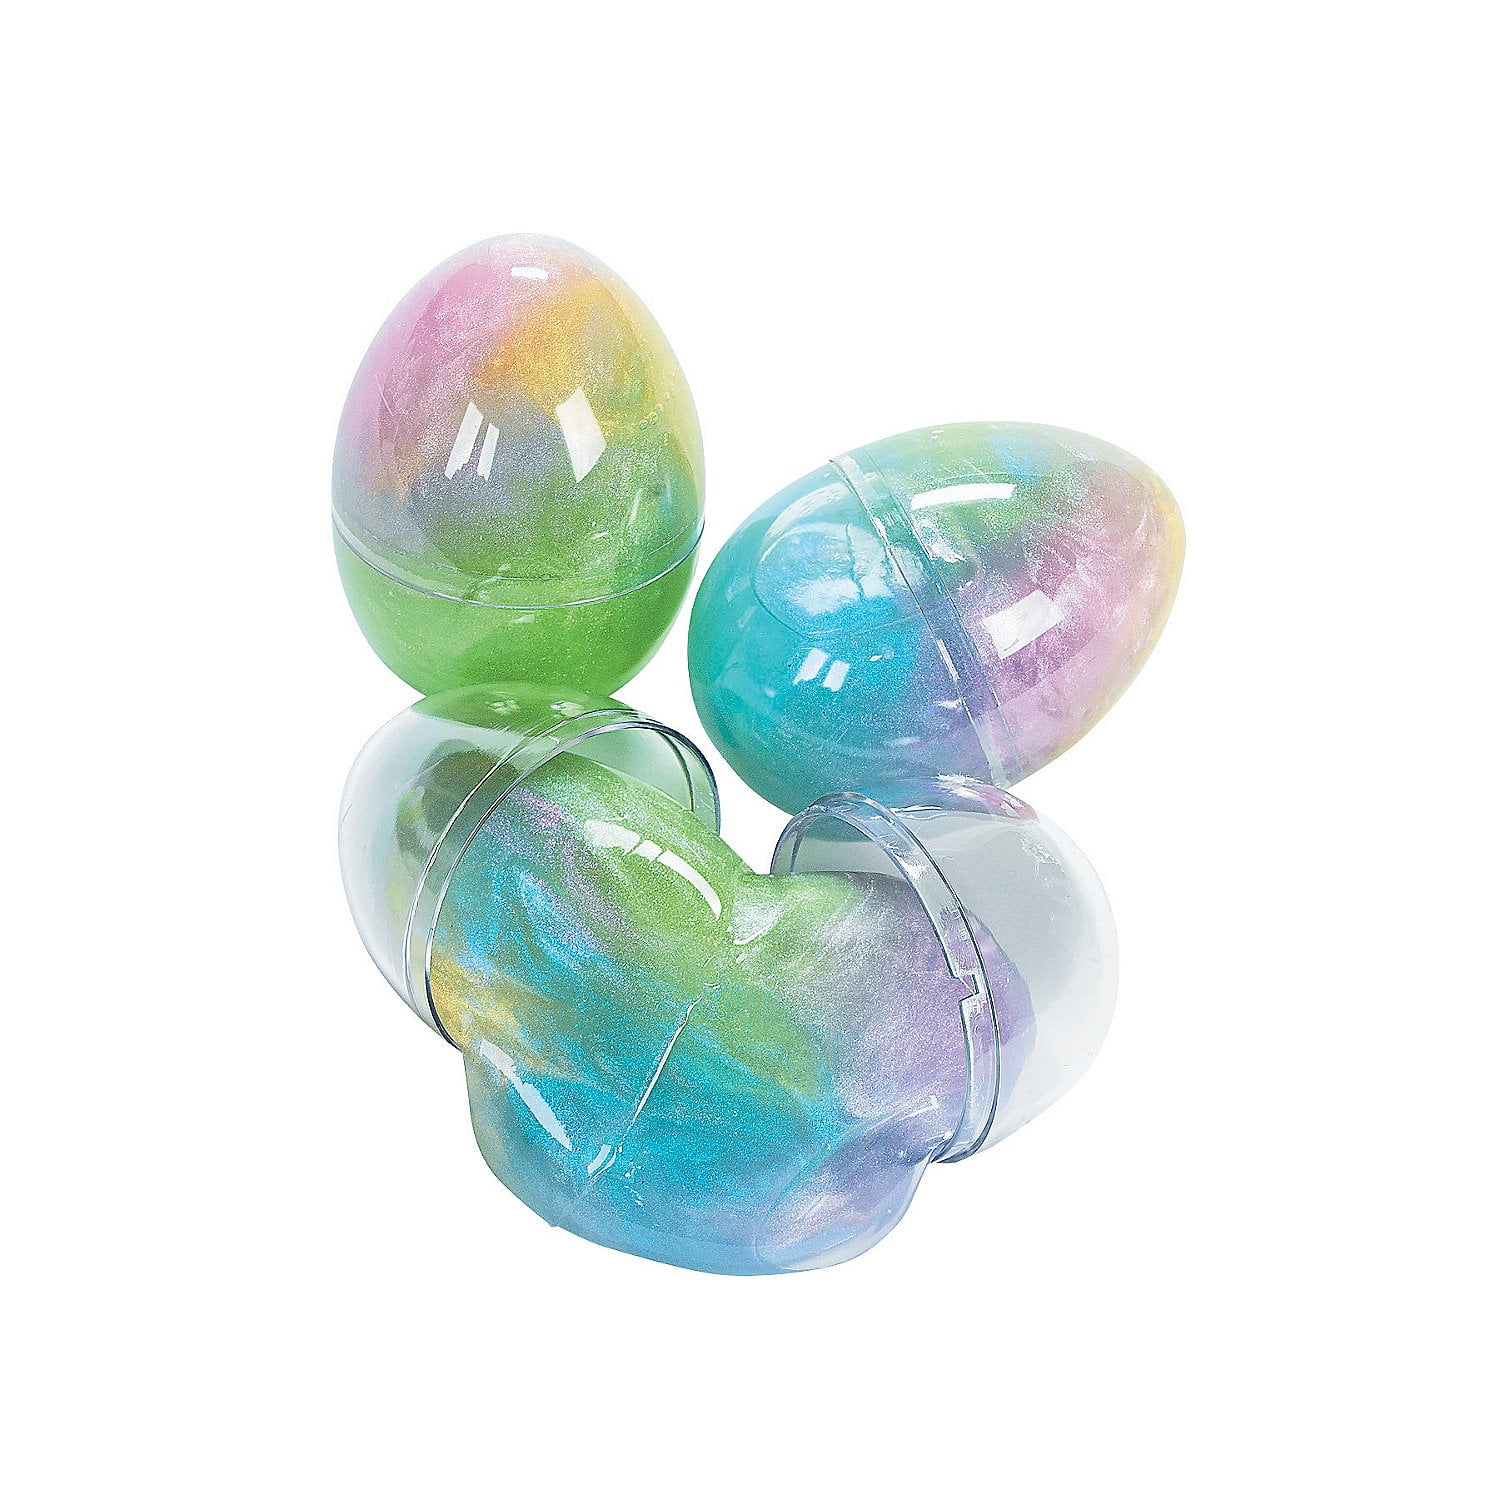 Easter Egg Swirled Cello Bags FREE SHIP Pack of 25 Great for Easter 